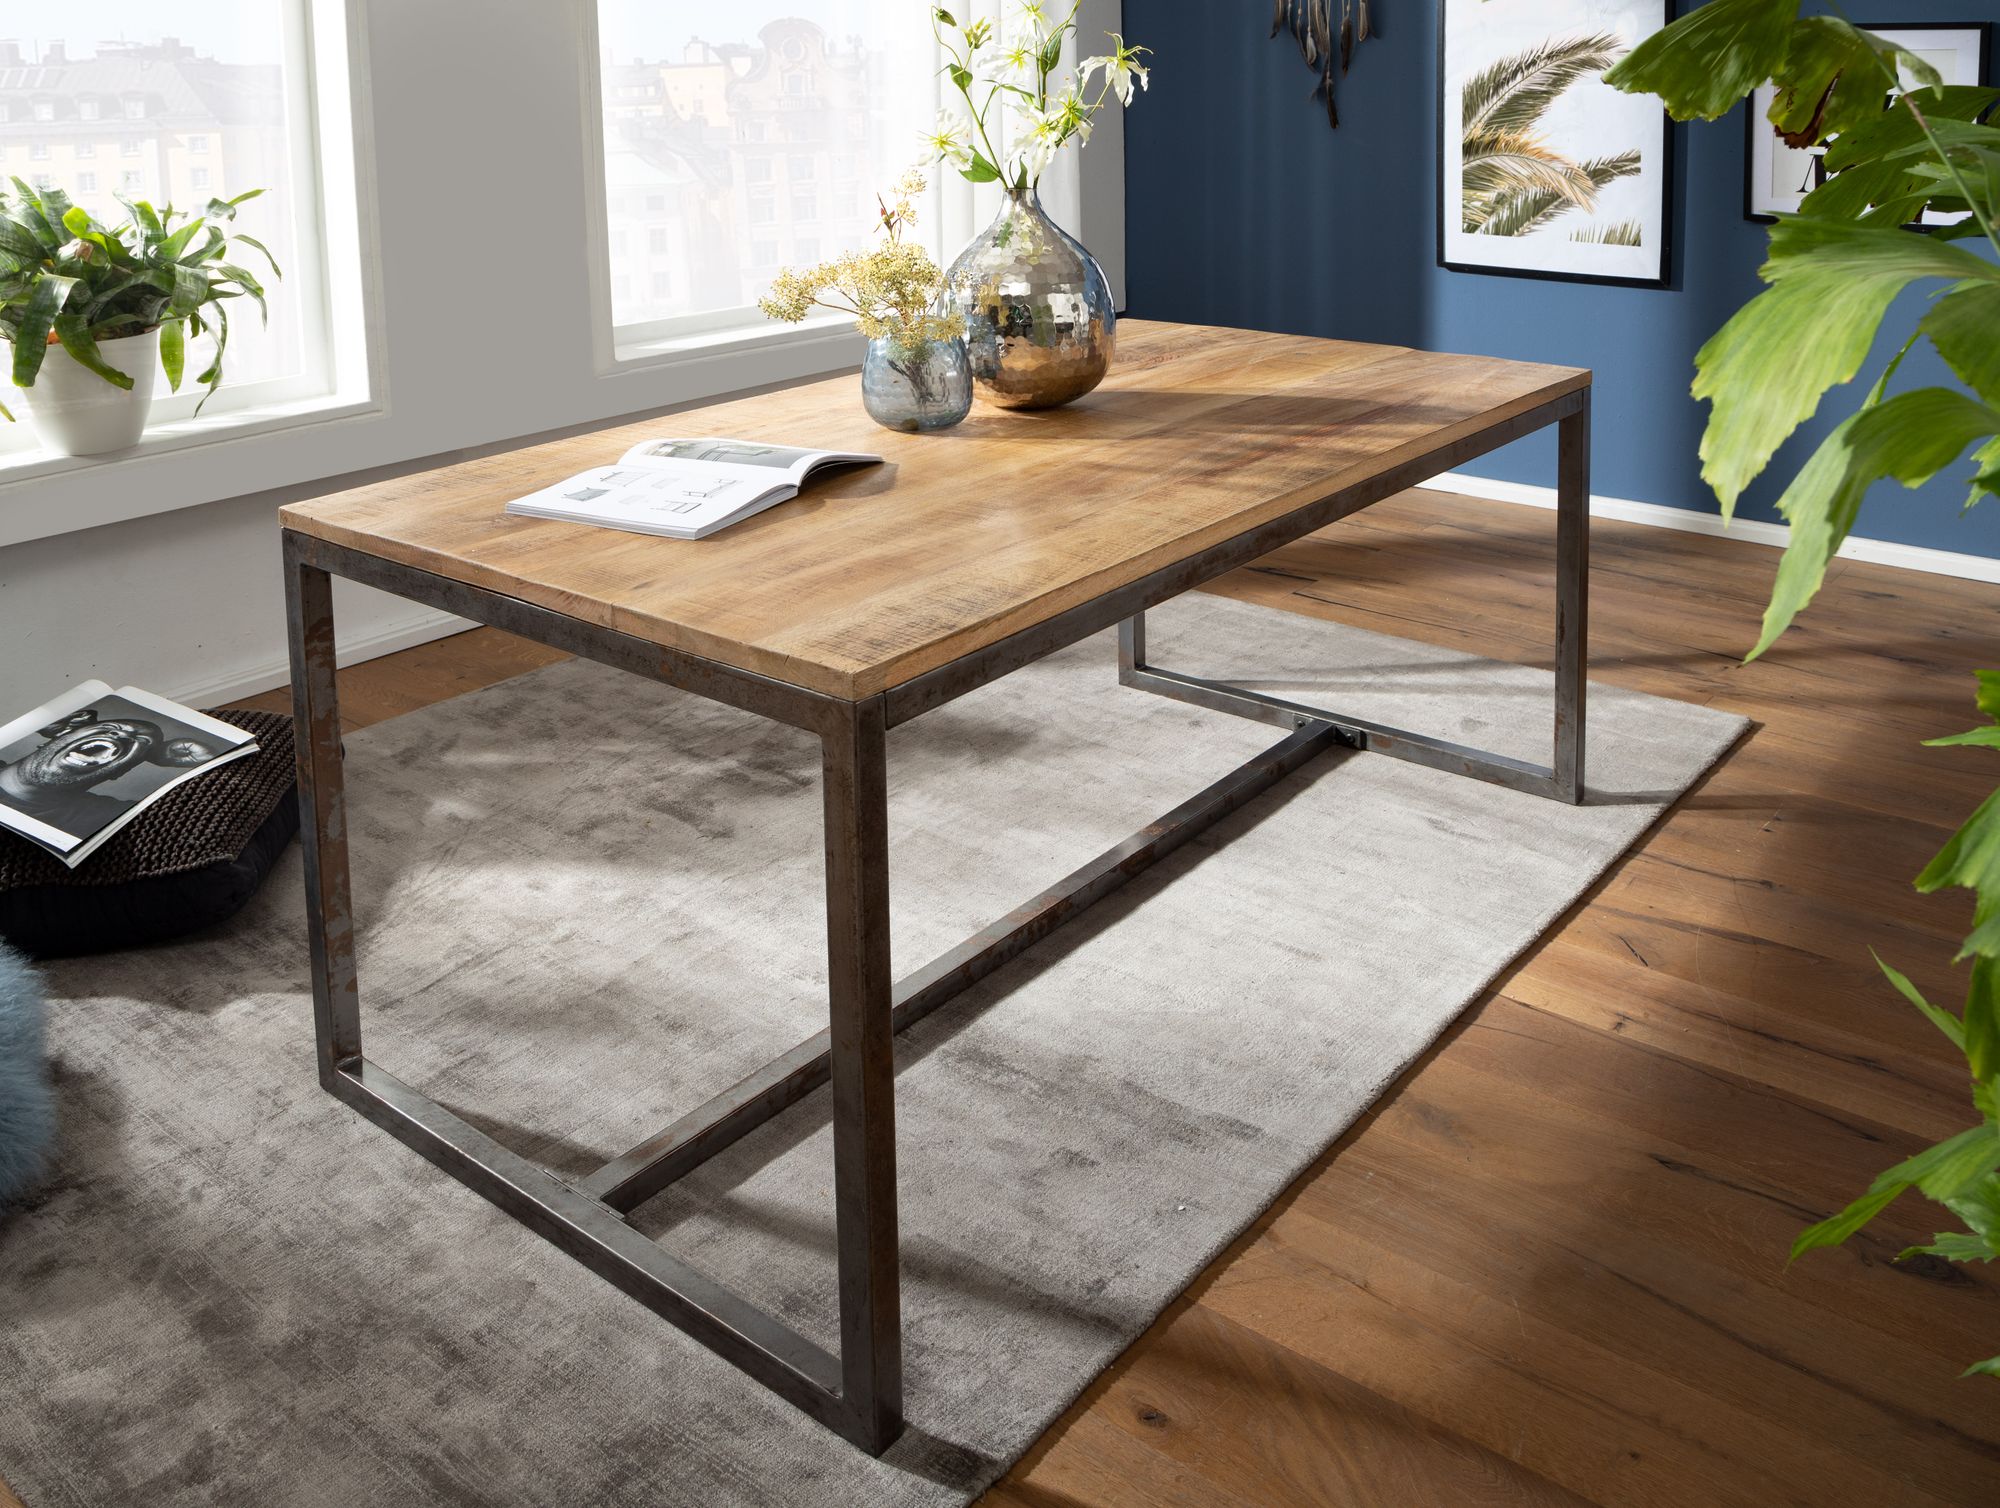 Nancy's Bretagne Dining table for 4 people - Kitchen table - Industrial table - Dining room table - 120 x 60 x 77 cm